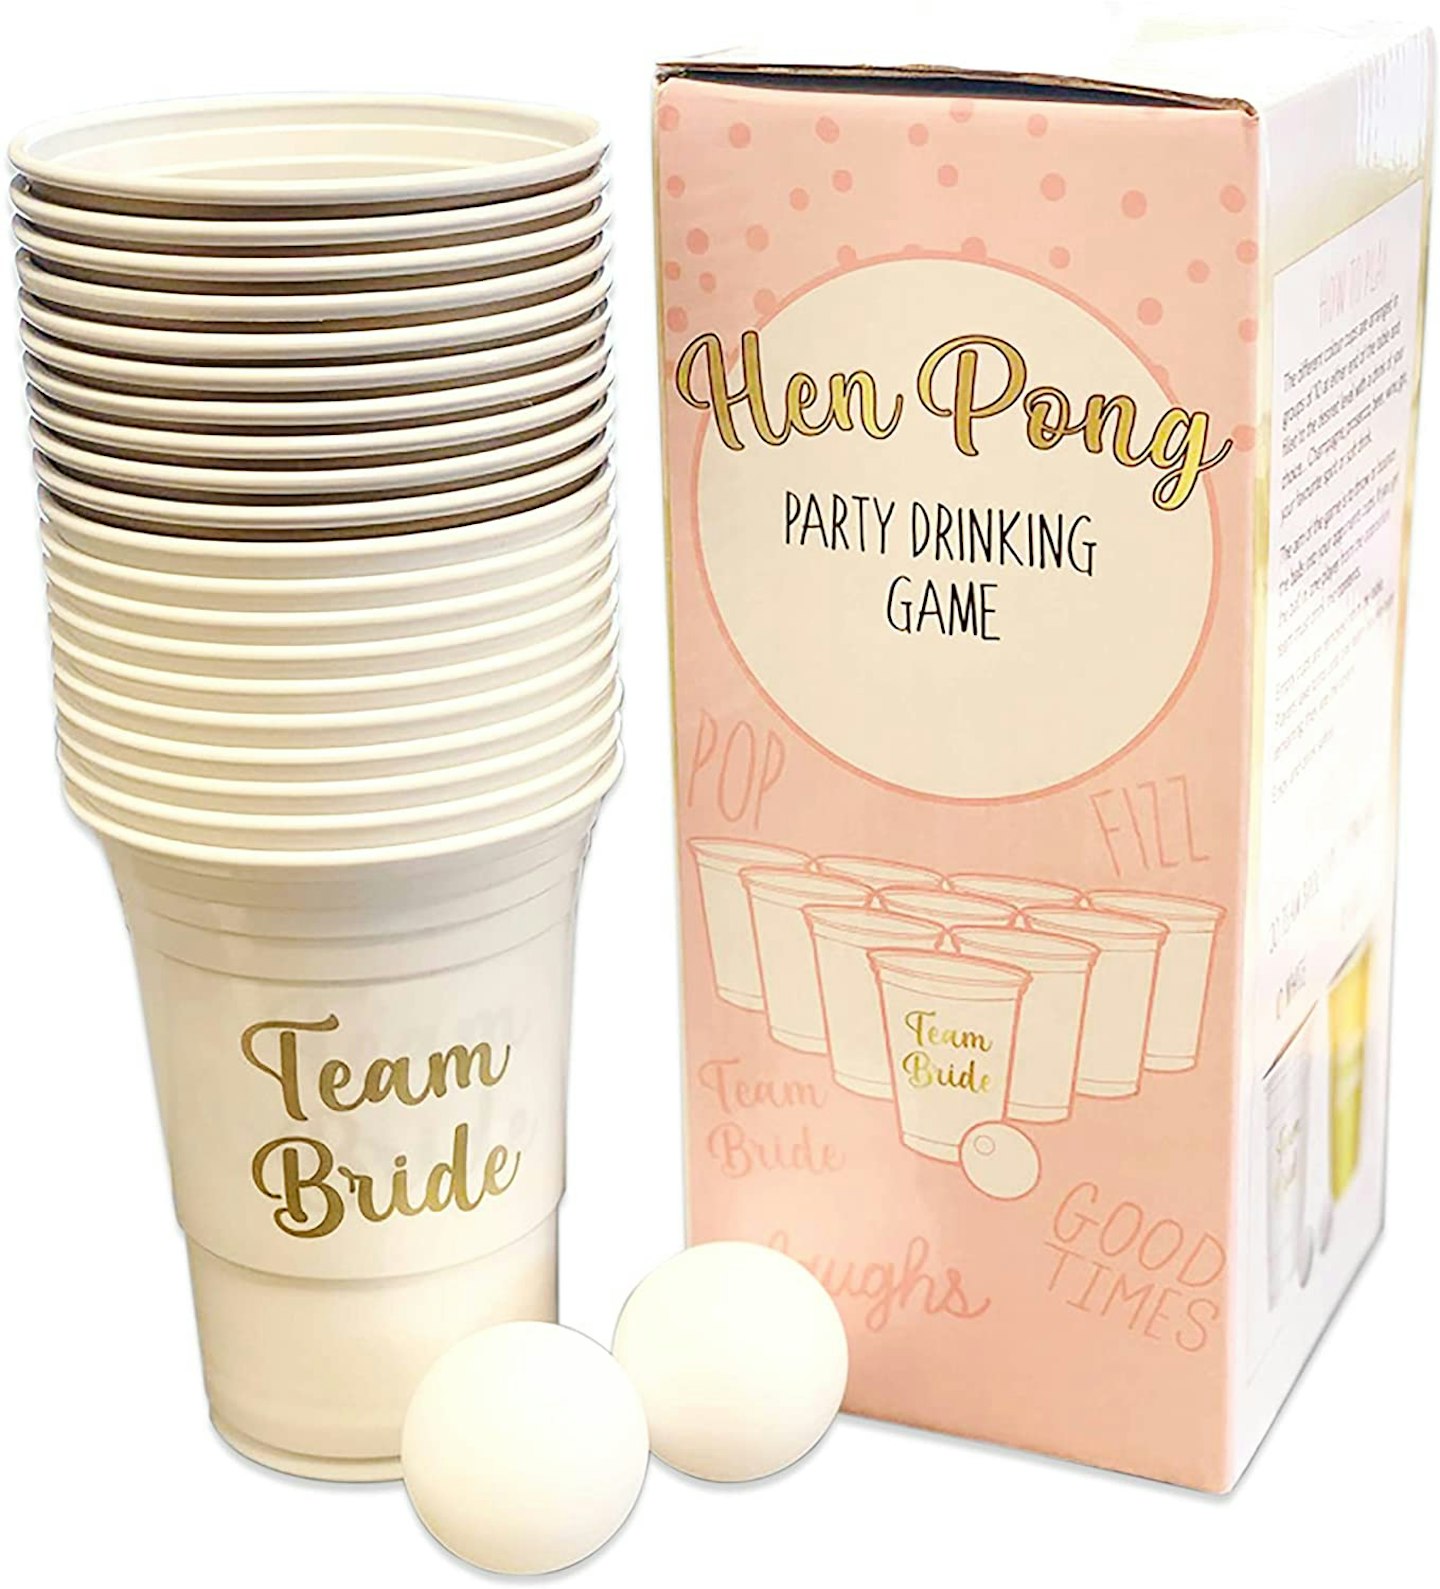 Hen Pong Party Drinking Game